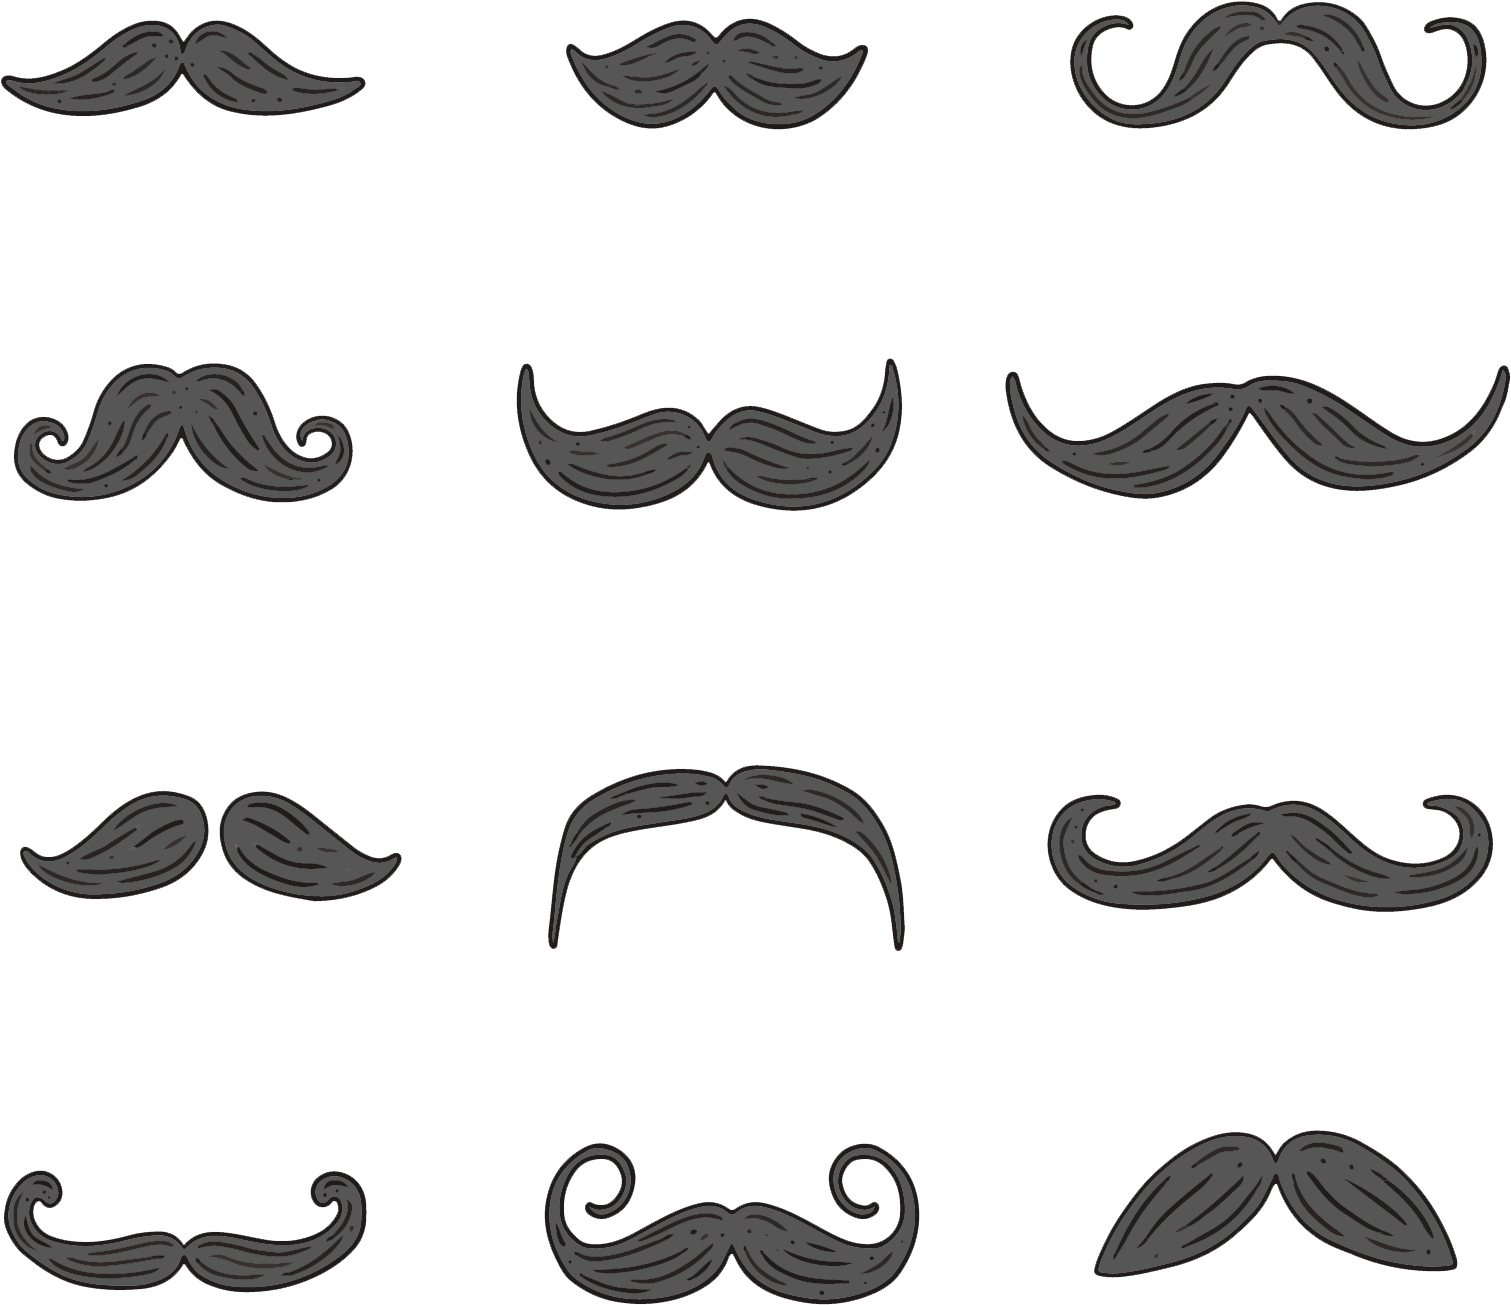 Varietyof Moustache Styles Illustration PNG image